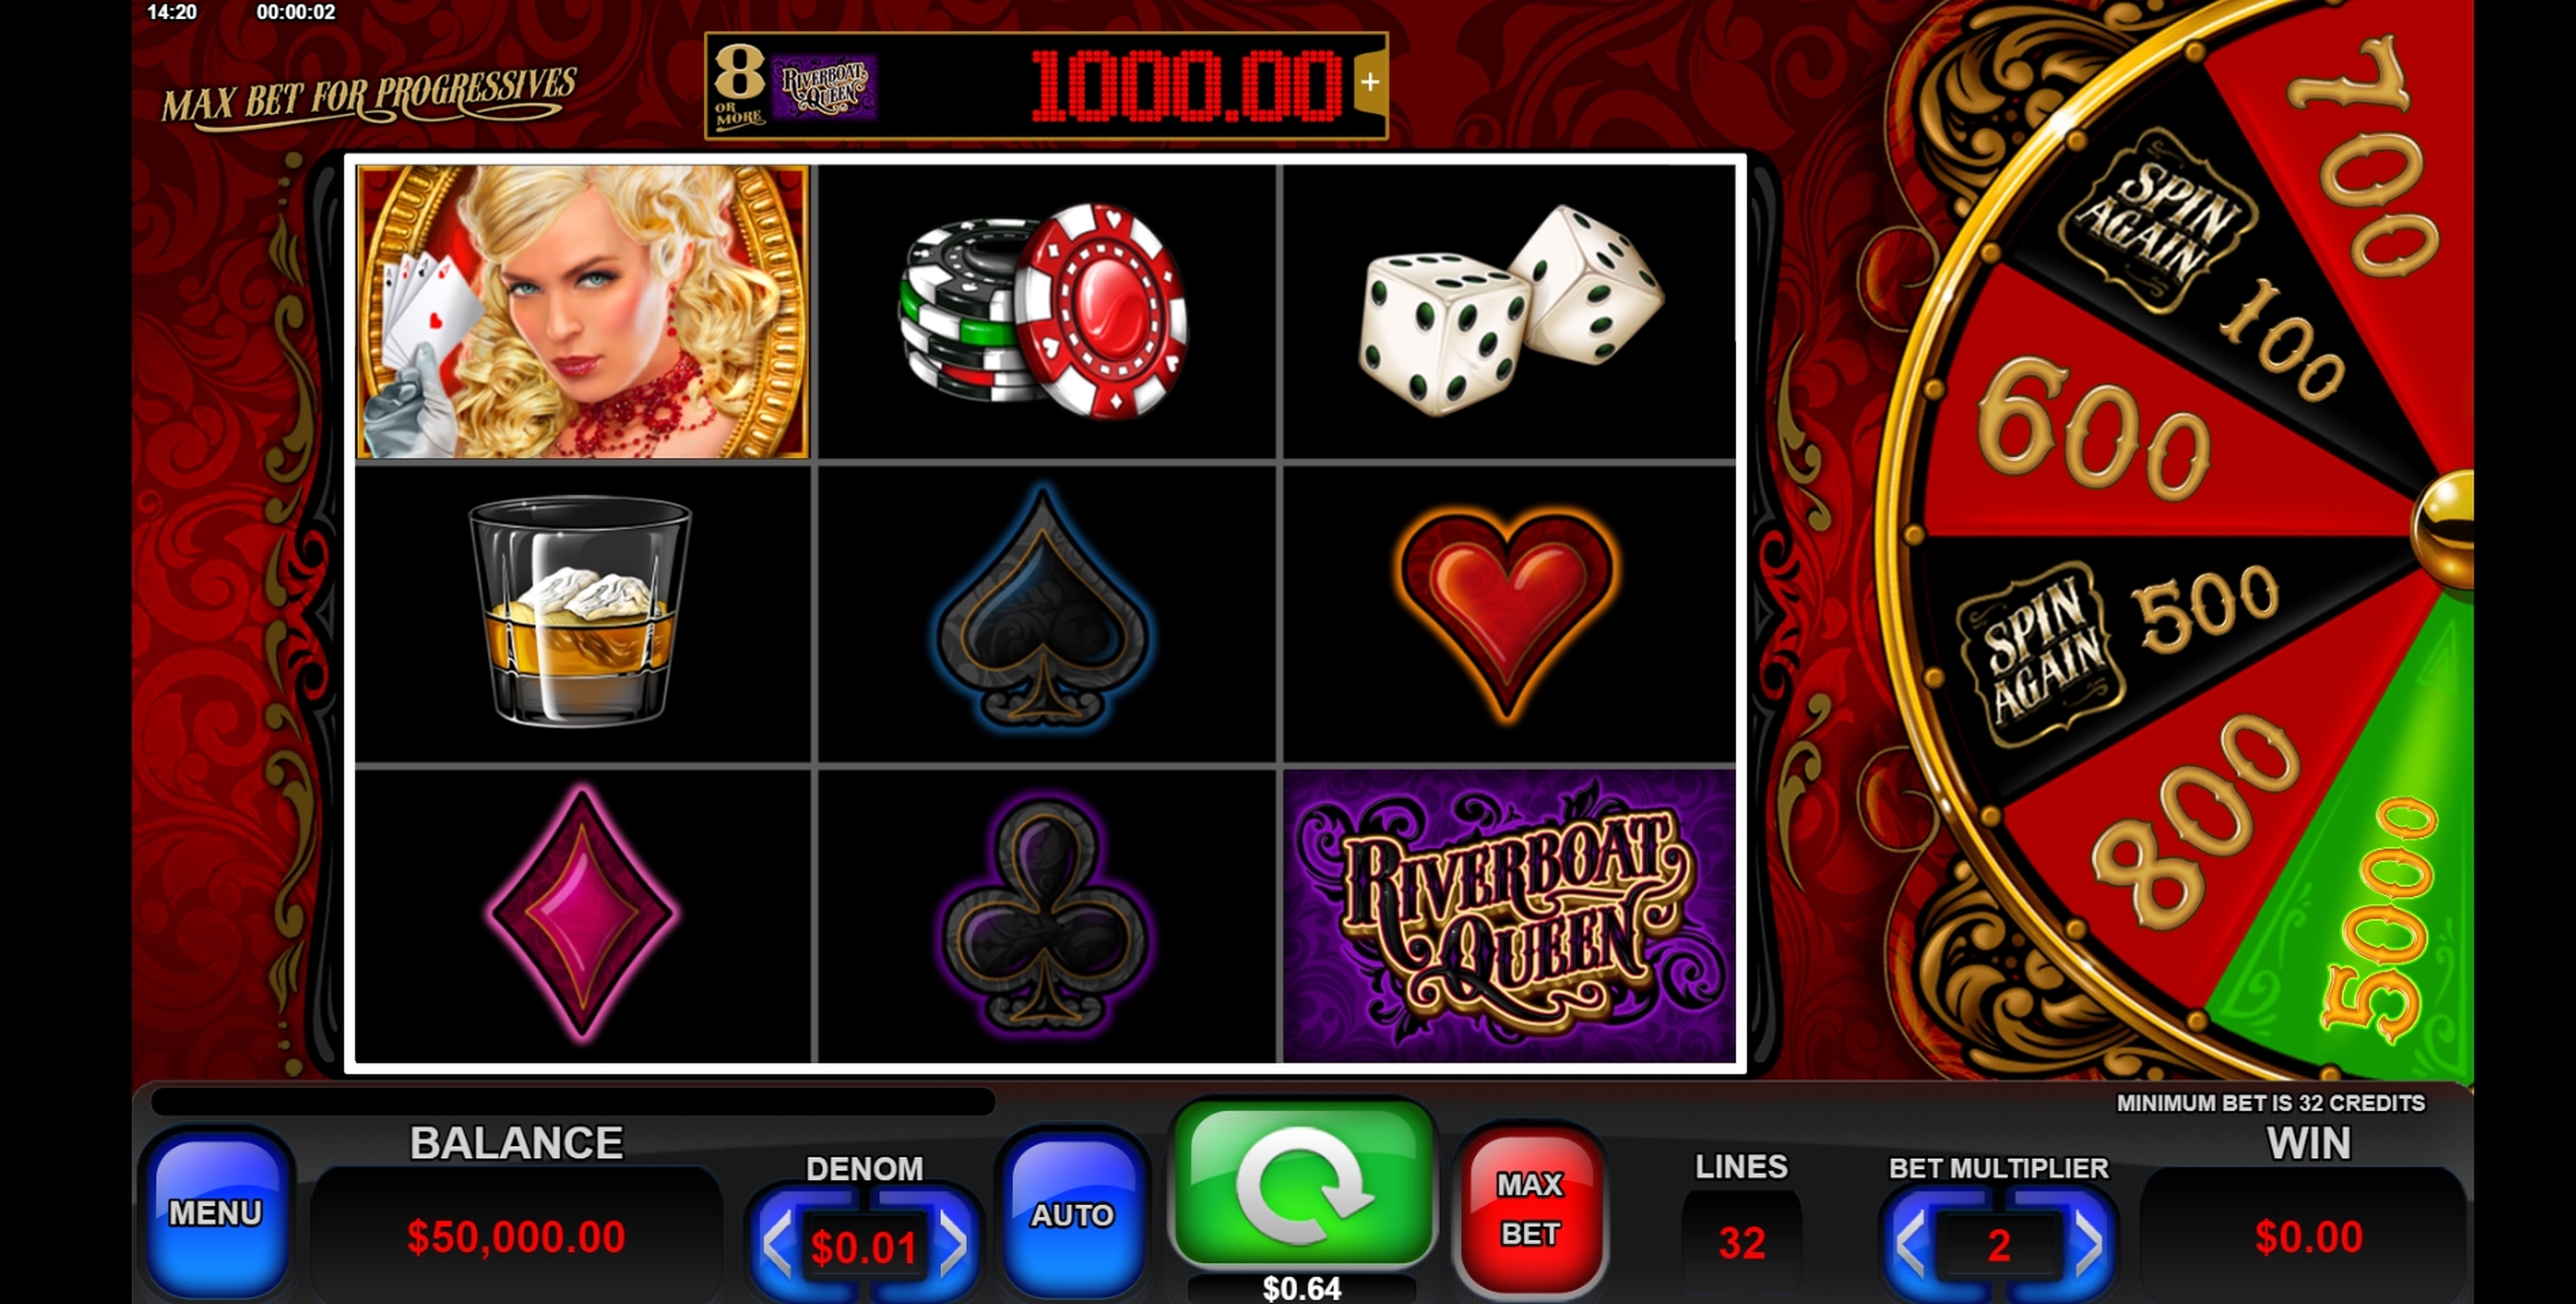 Reels in Riverboat Queen Slot Game by Everi